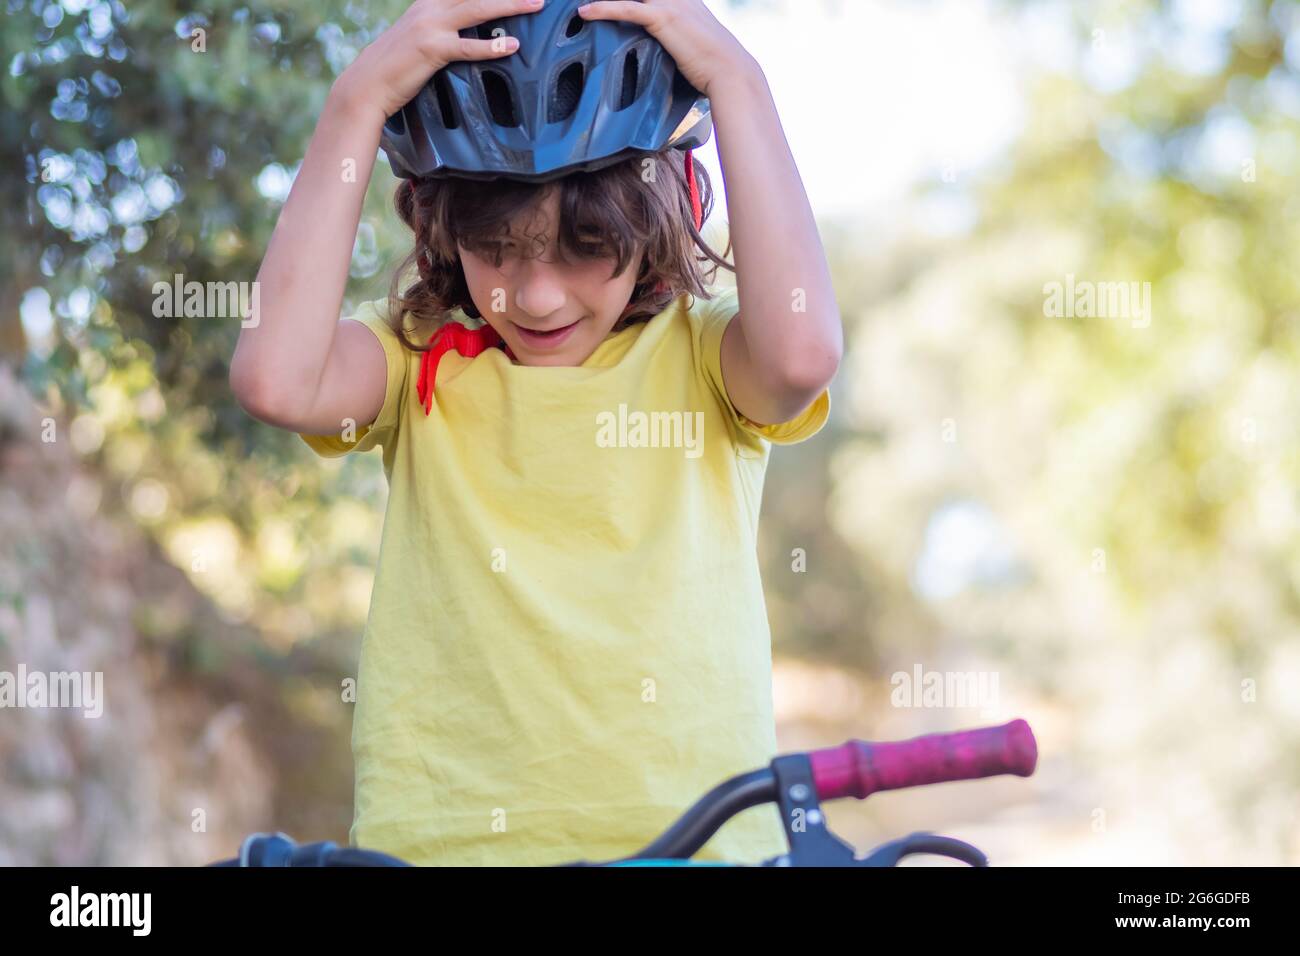 little smiling boy with long hair and yellow t-shirt adjusting his safety helmet while riding his bike through the streets of his town Stock Photo